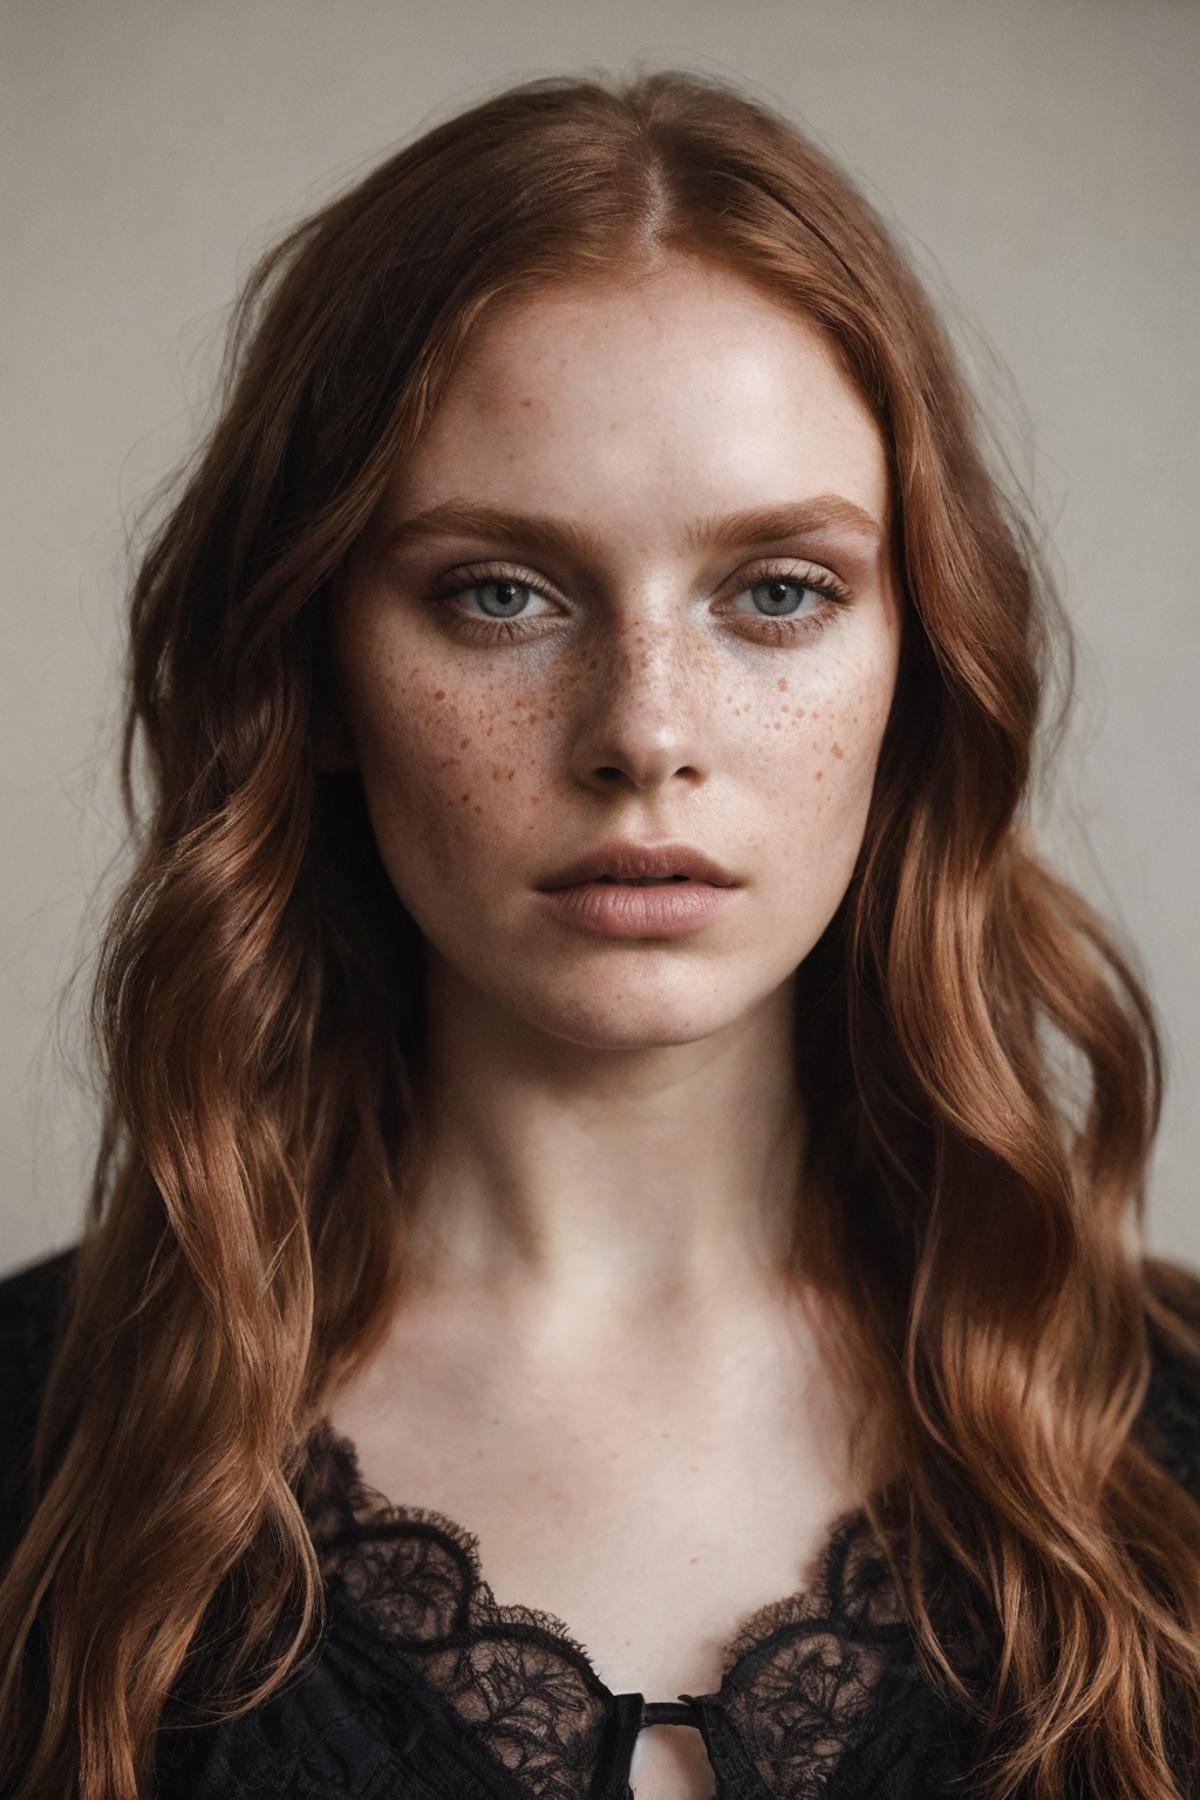 A close-up of a woman's face with freckles and long red hair.